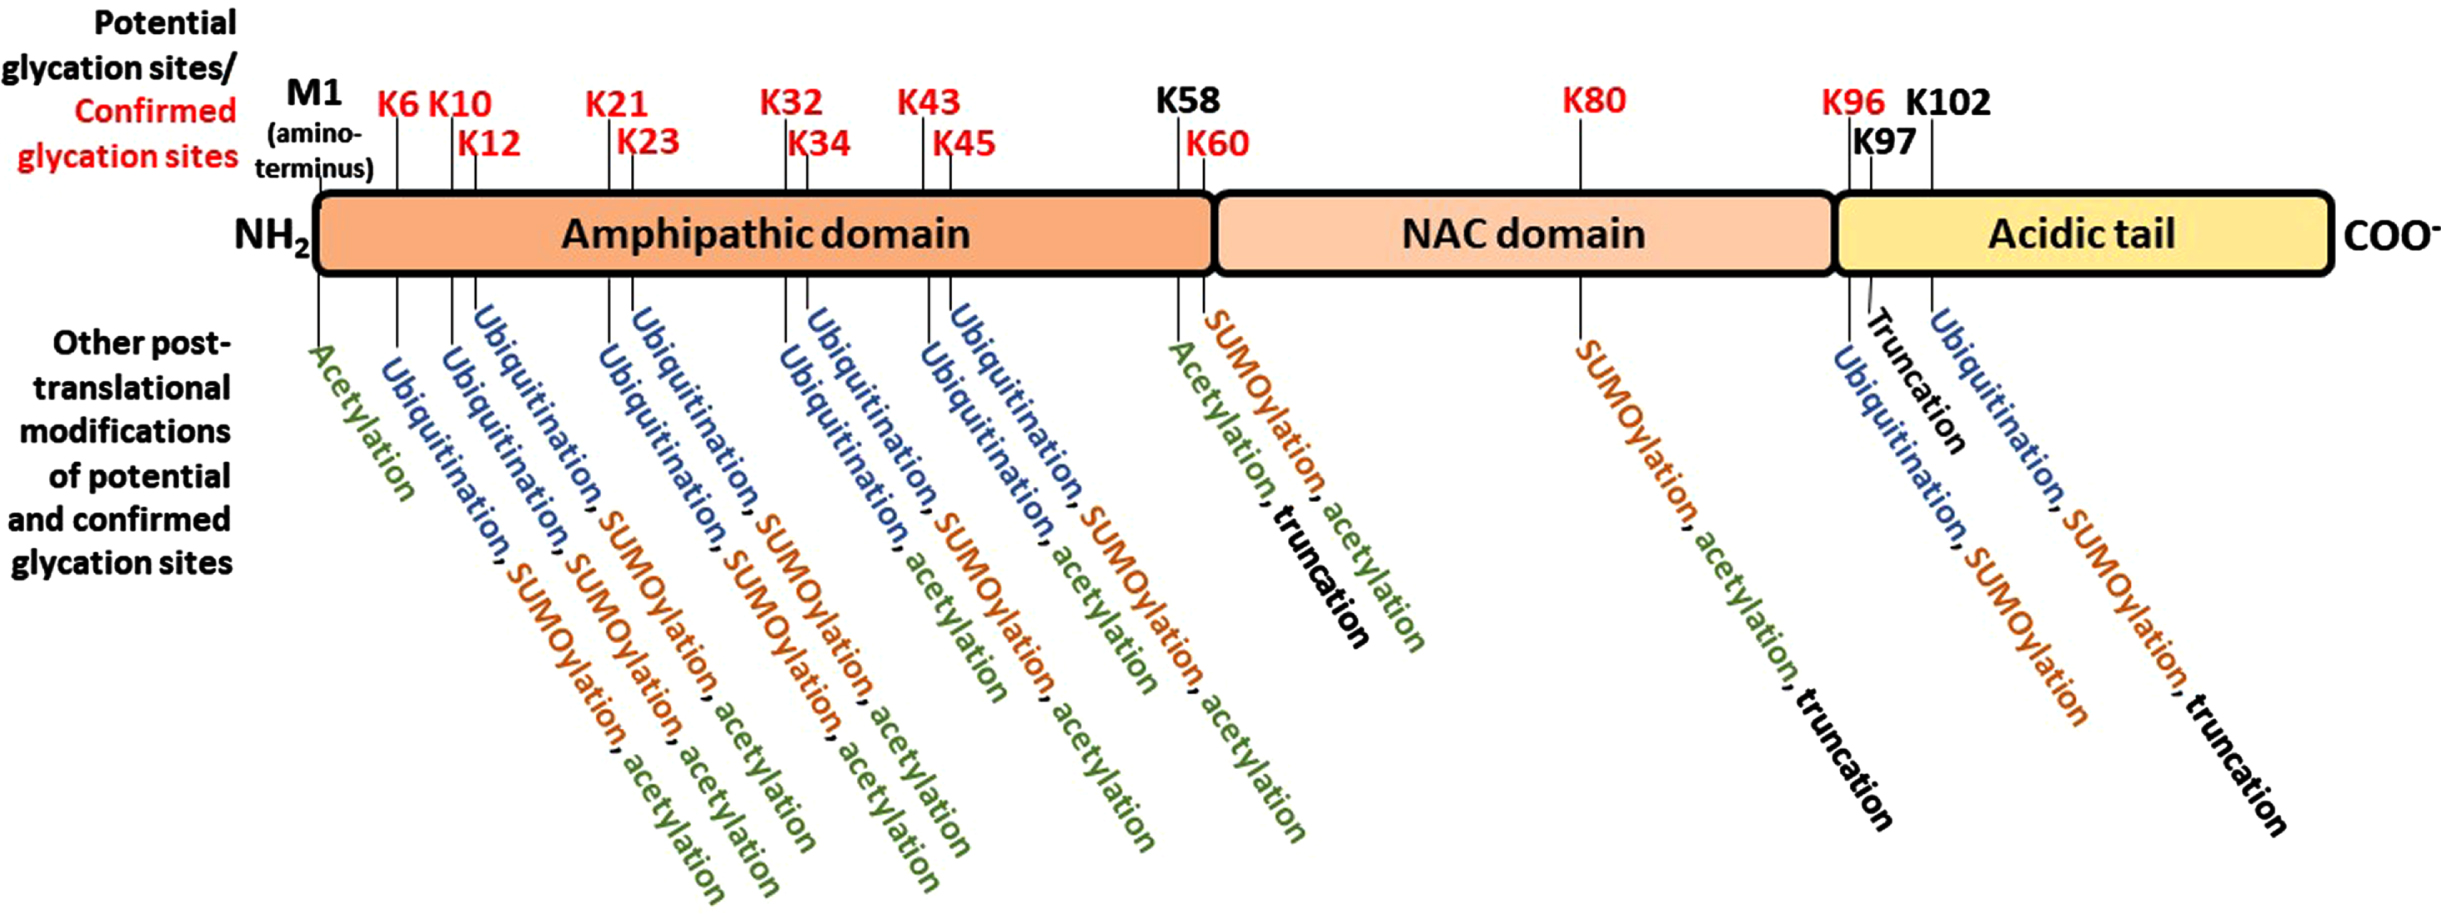 Schematic representation of α-synuclein, highlighting the three domains defined based on the amino acid composition, the potential glycation sites and alternative post-translational modifications of each potential glycation site. N-terminal region, positively charged region. NAC: non-amyloid-β component. C-terminal acidic region. The positions of all potential glycation residues – every lysine (K) residue, along with the N-terminal methionine (M) - are marked in the upper part of the schematic protein structure; red text denote the residues in which glycation has been experimentally confirmed. In the lower part of the panel, the other post-translational modifications that have been observed at each correspondent glycation site marked in the upper panel are listed.